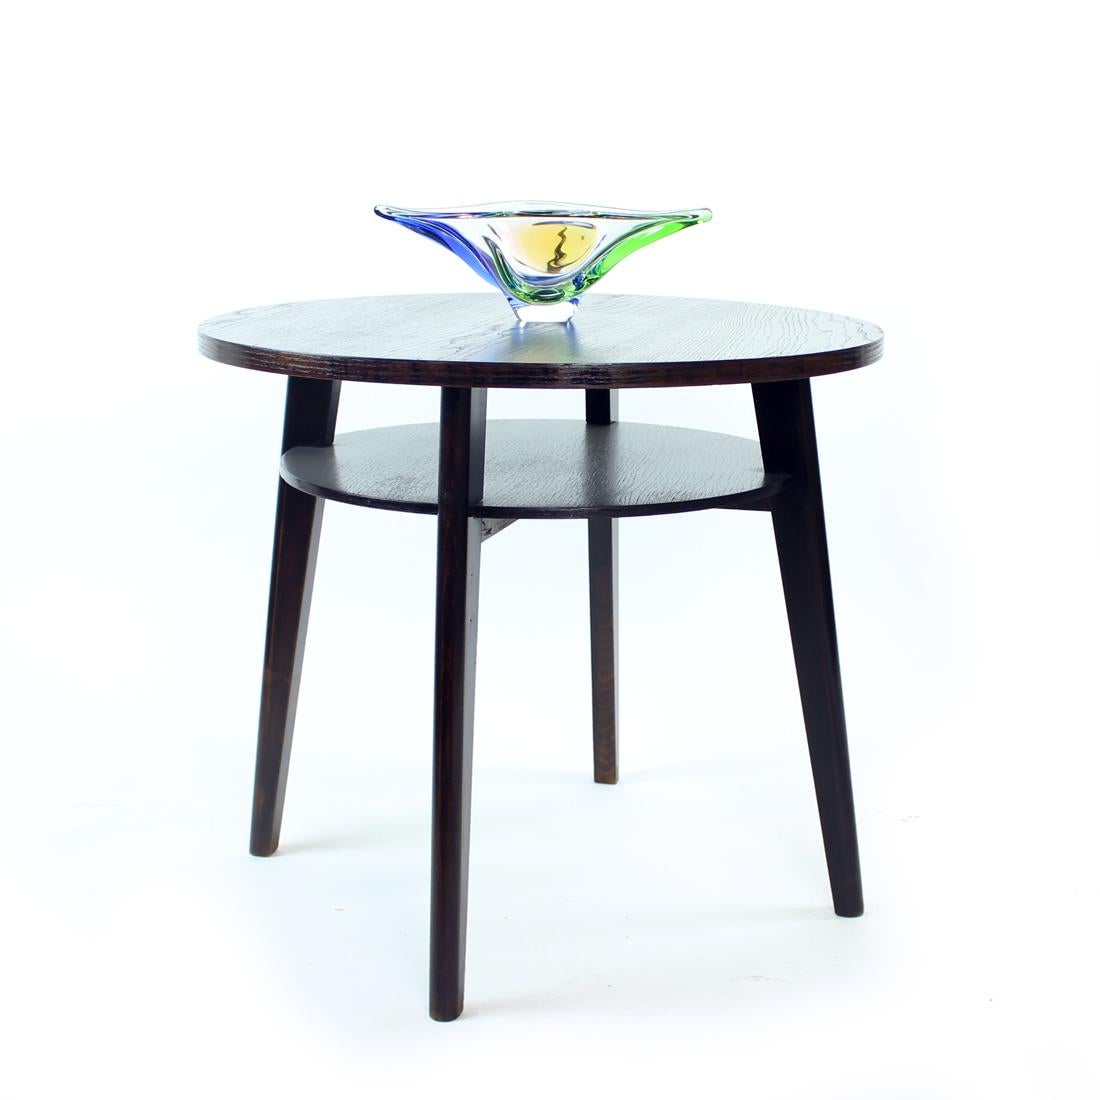 Mid-20th Century Round Black Coffee Table, Czechoslovakia 1960s For Sale